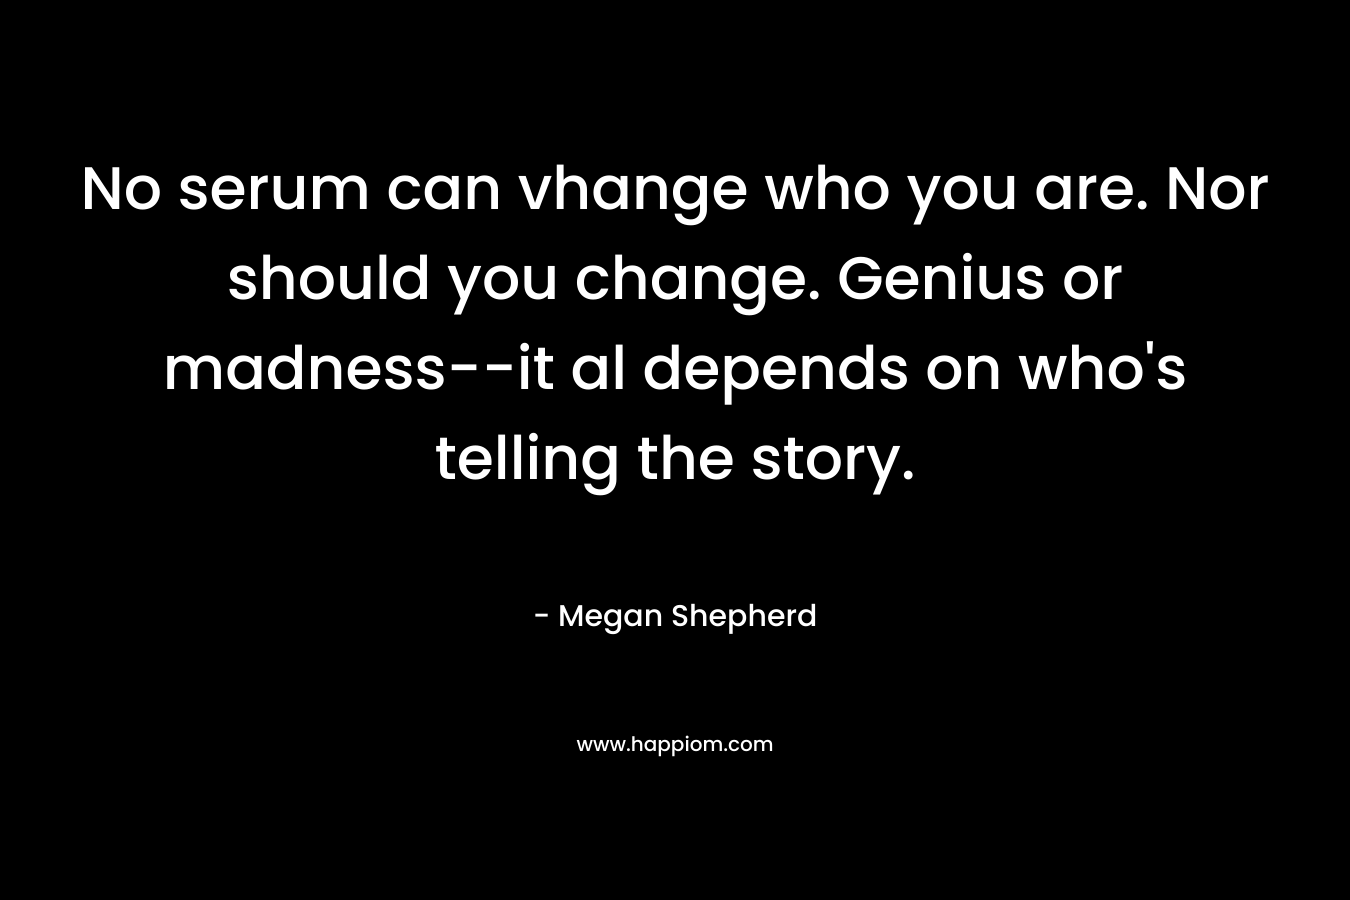 No serum can vhange who you are. Nor should you change. Genius or madness--it al depends on who's telling the story.